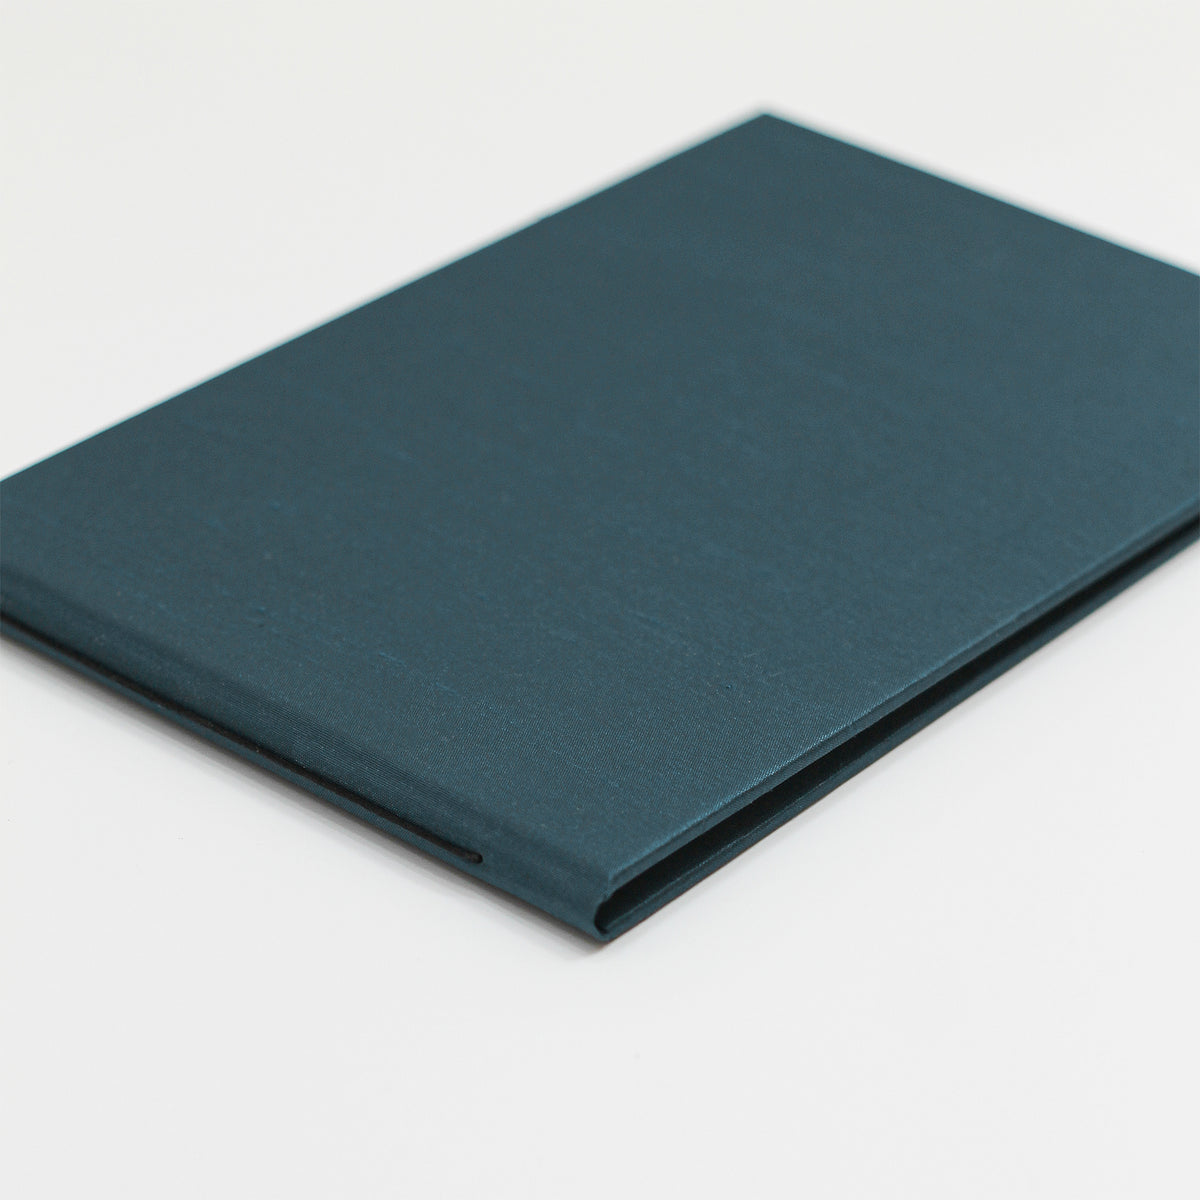 Guestbook with Teal Blue Silk Cover